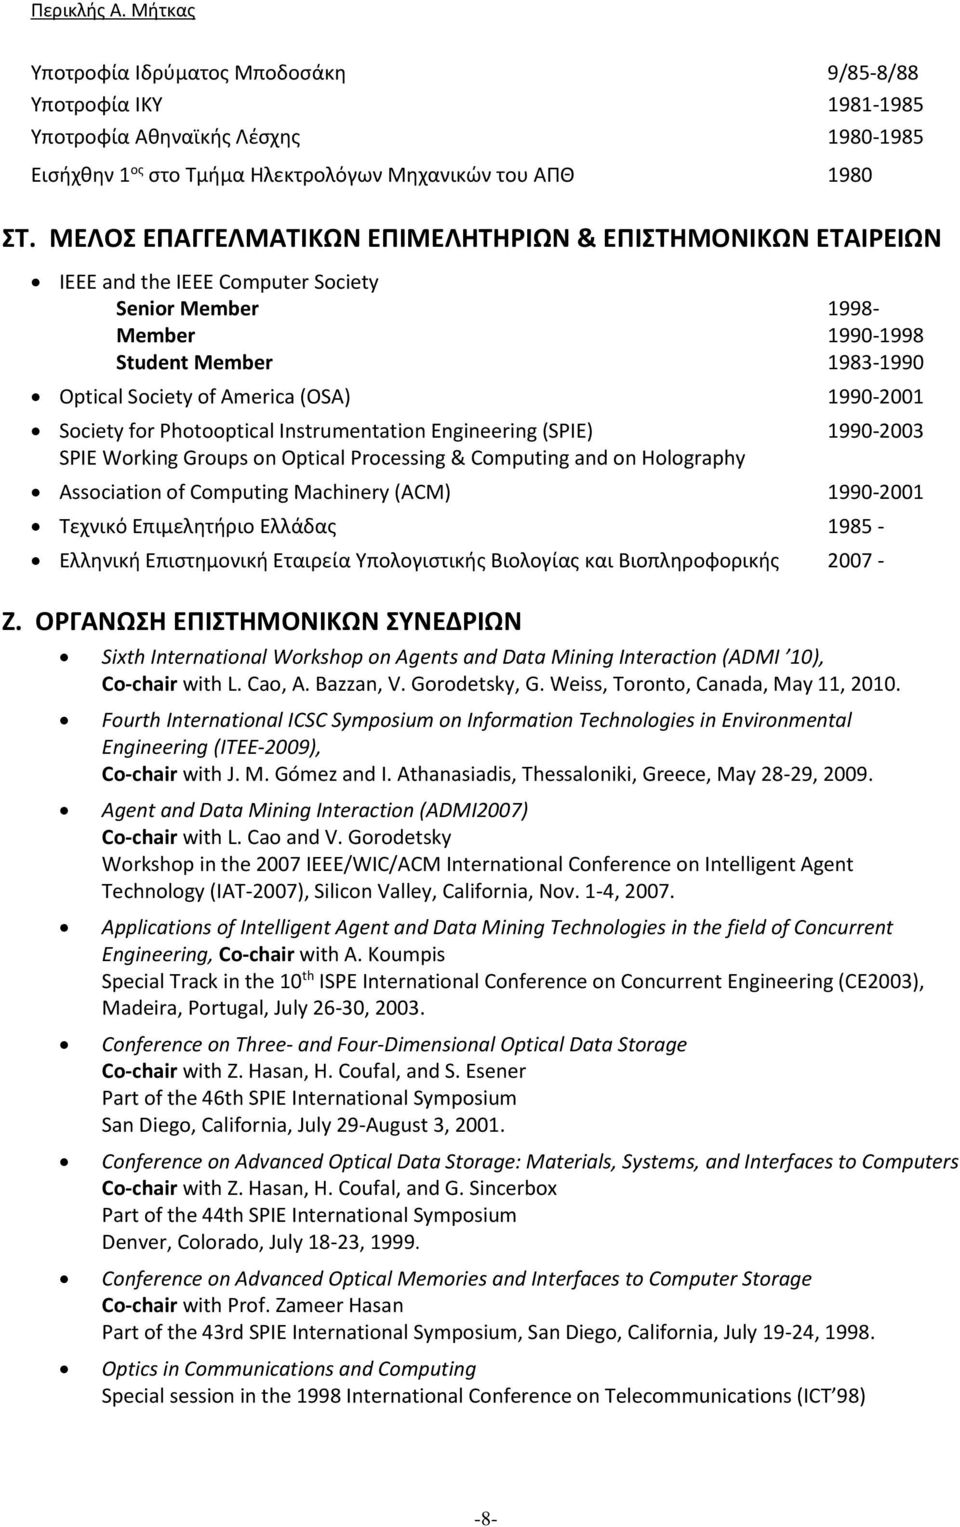 1990-2001 Society for Photooptical Instrumentation Engineering (SPIE) 1990-2003 SPIE Working Groups on Optical Processing & Computing and on Holography Association of Computing Machinery (ACM)